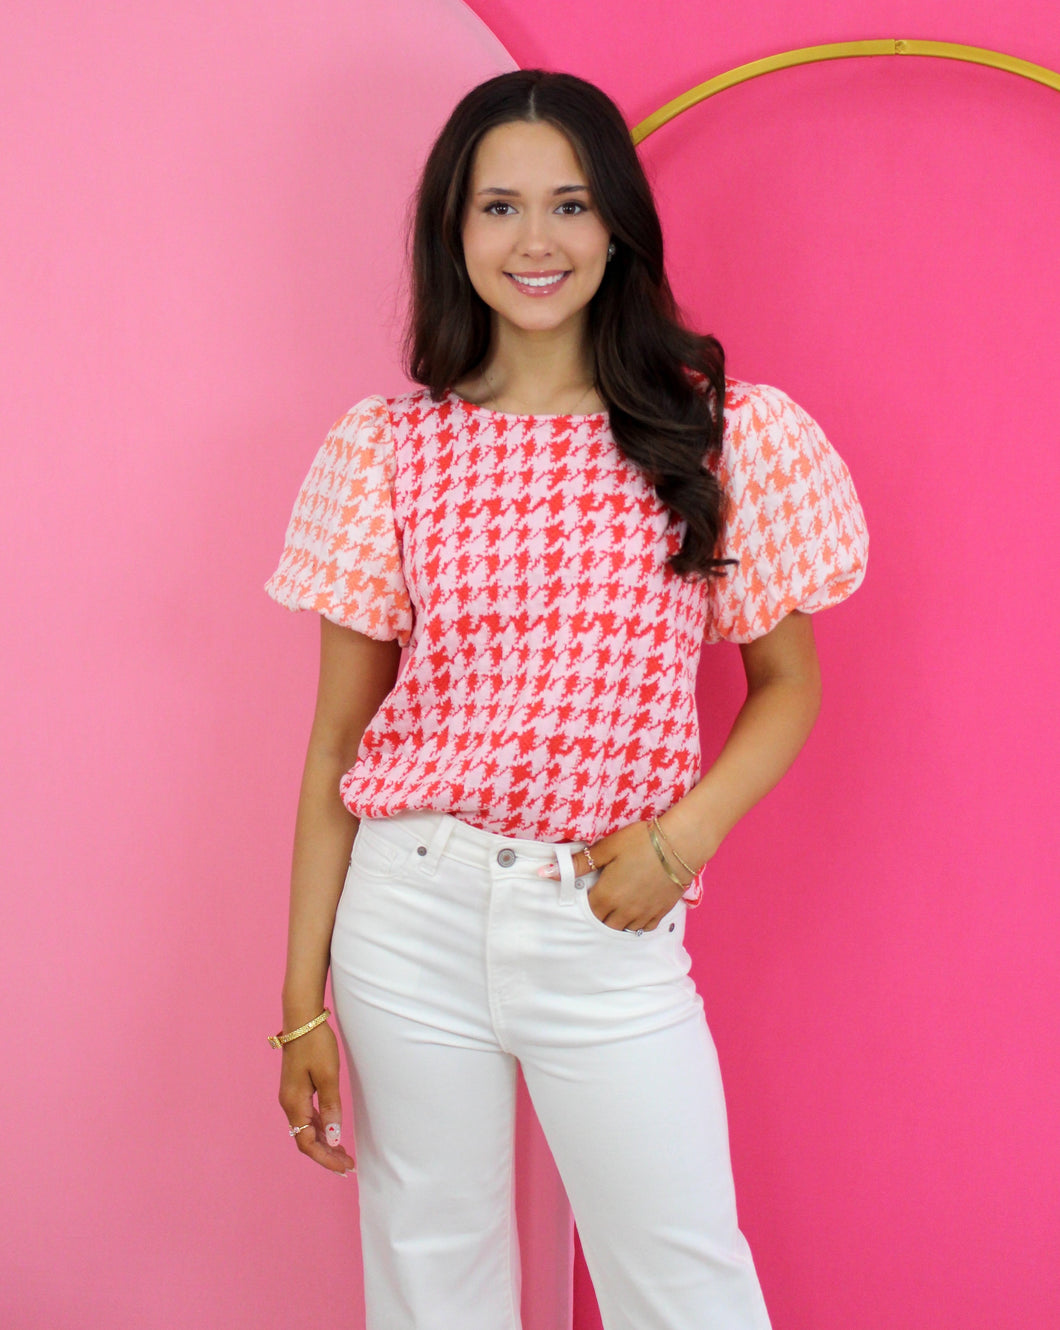 Holly’s Houndstooth Top